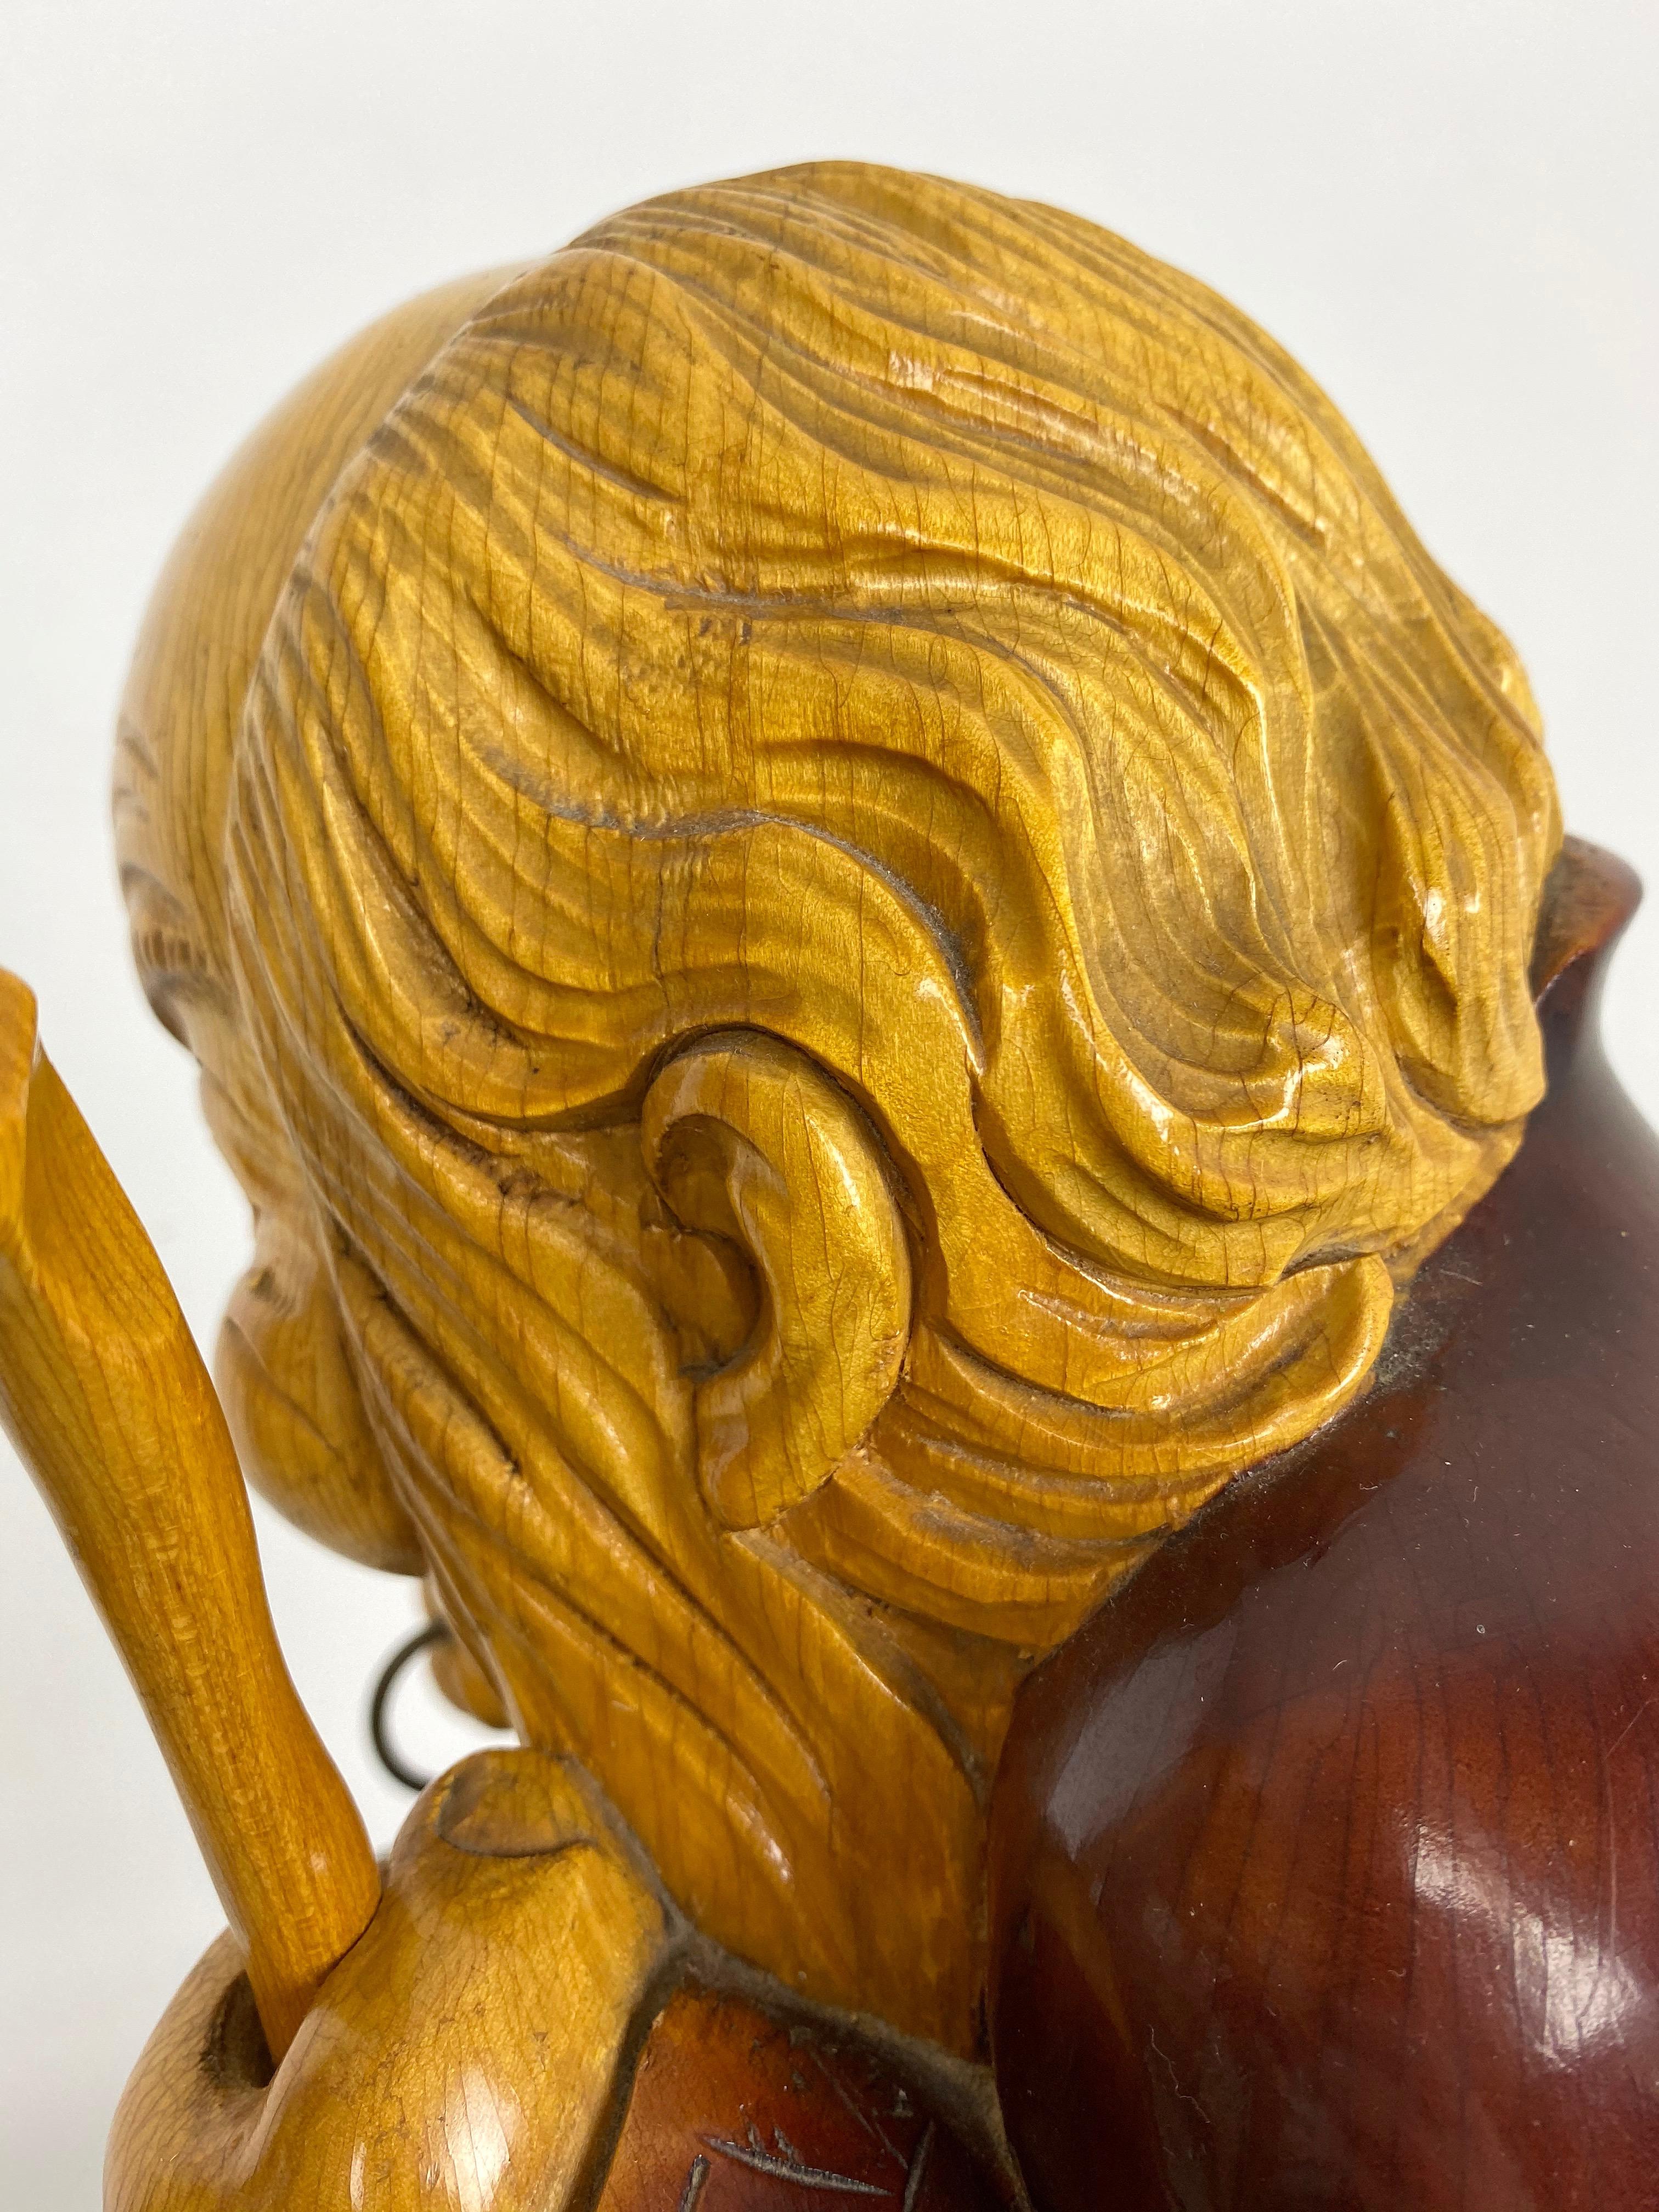 Hand Carved Wood Monk Table Lamp by Aldo Tura for Macabo, Italy, 1950s For Sale 2